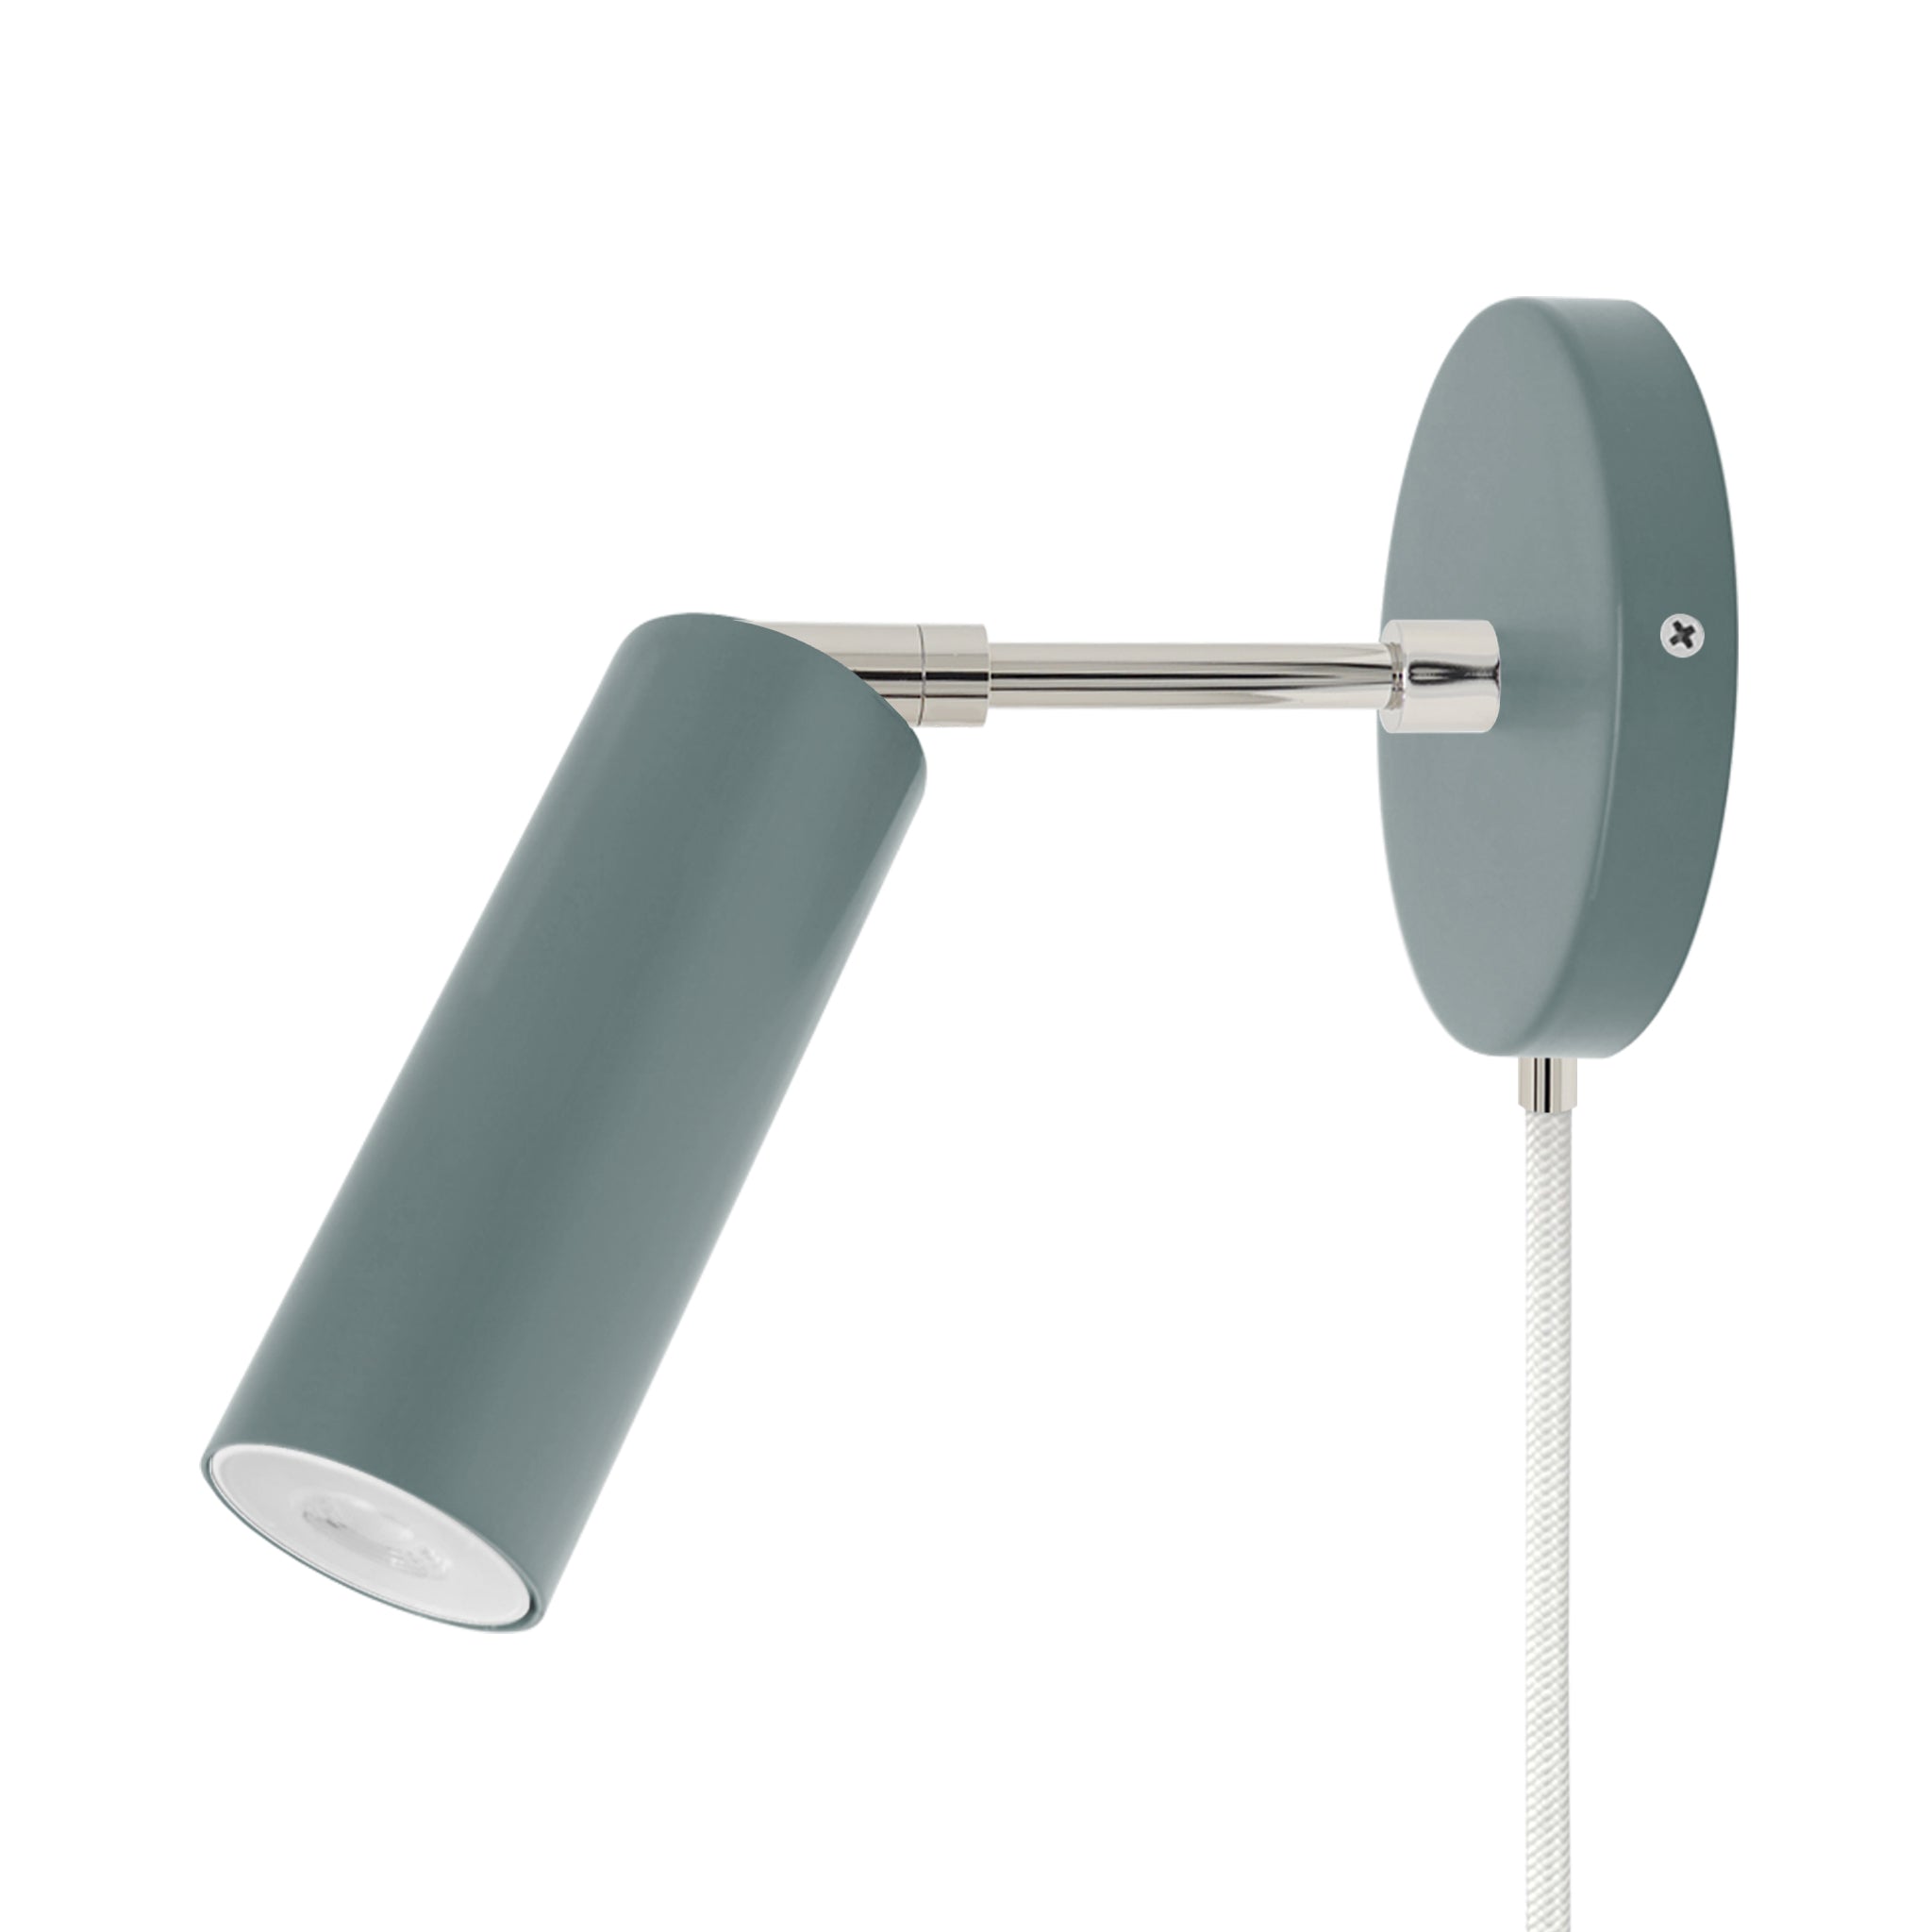 Nickel and python green color Reader plug-in sconce 3" arm Dutton Brown lighting